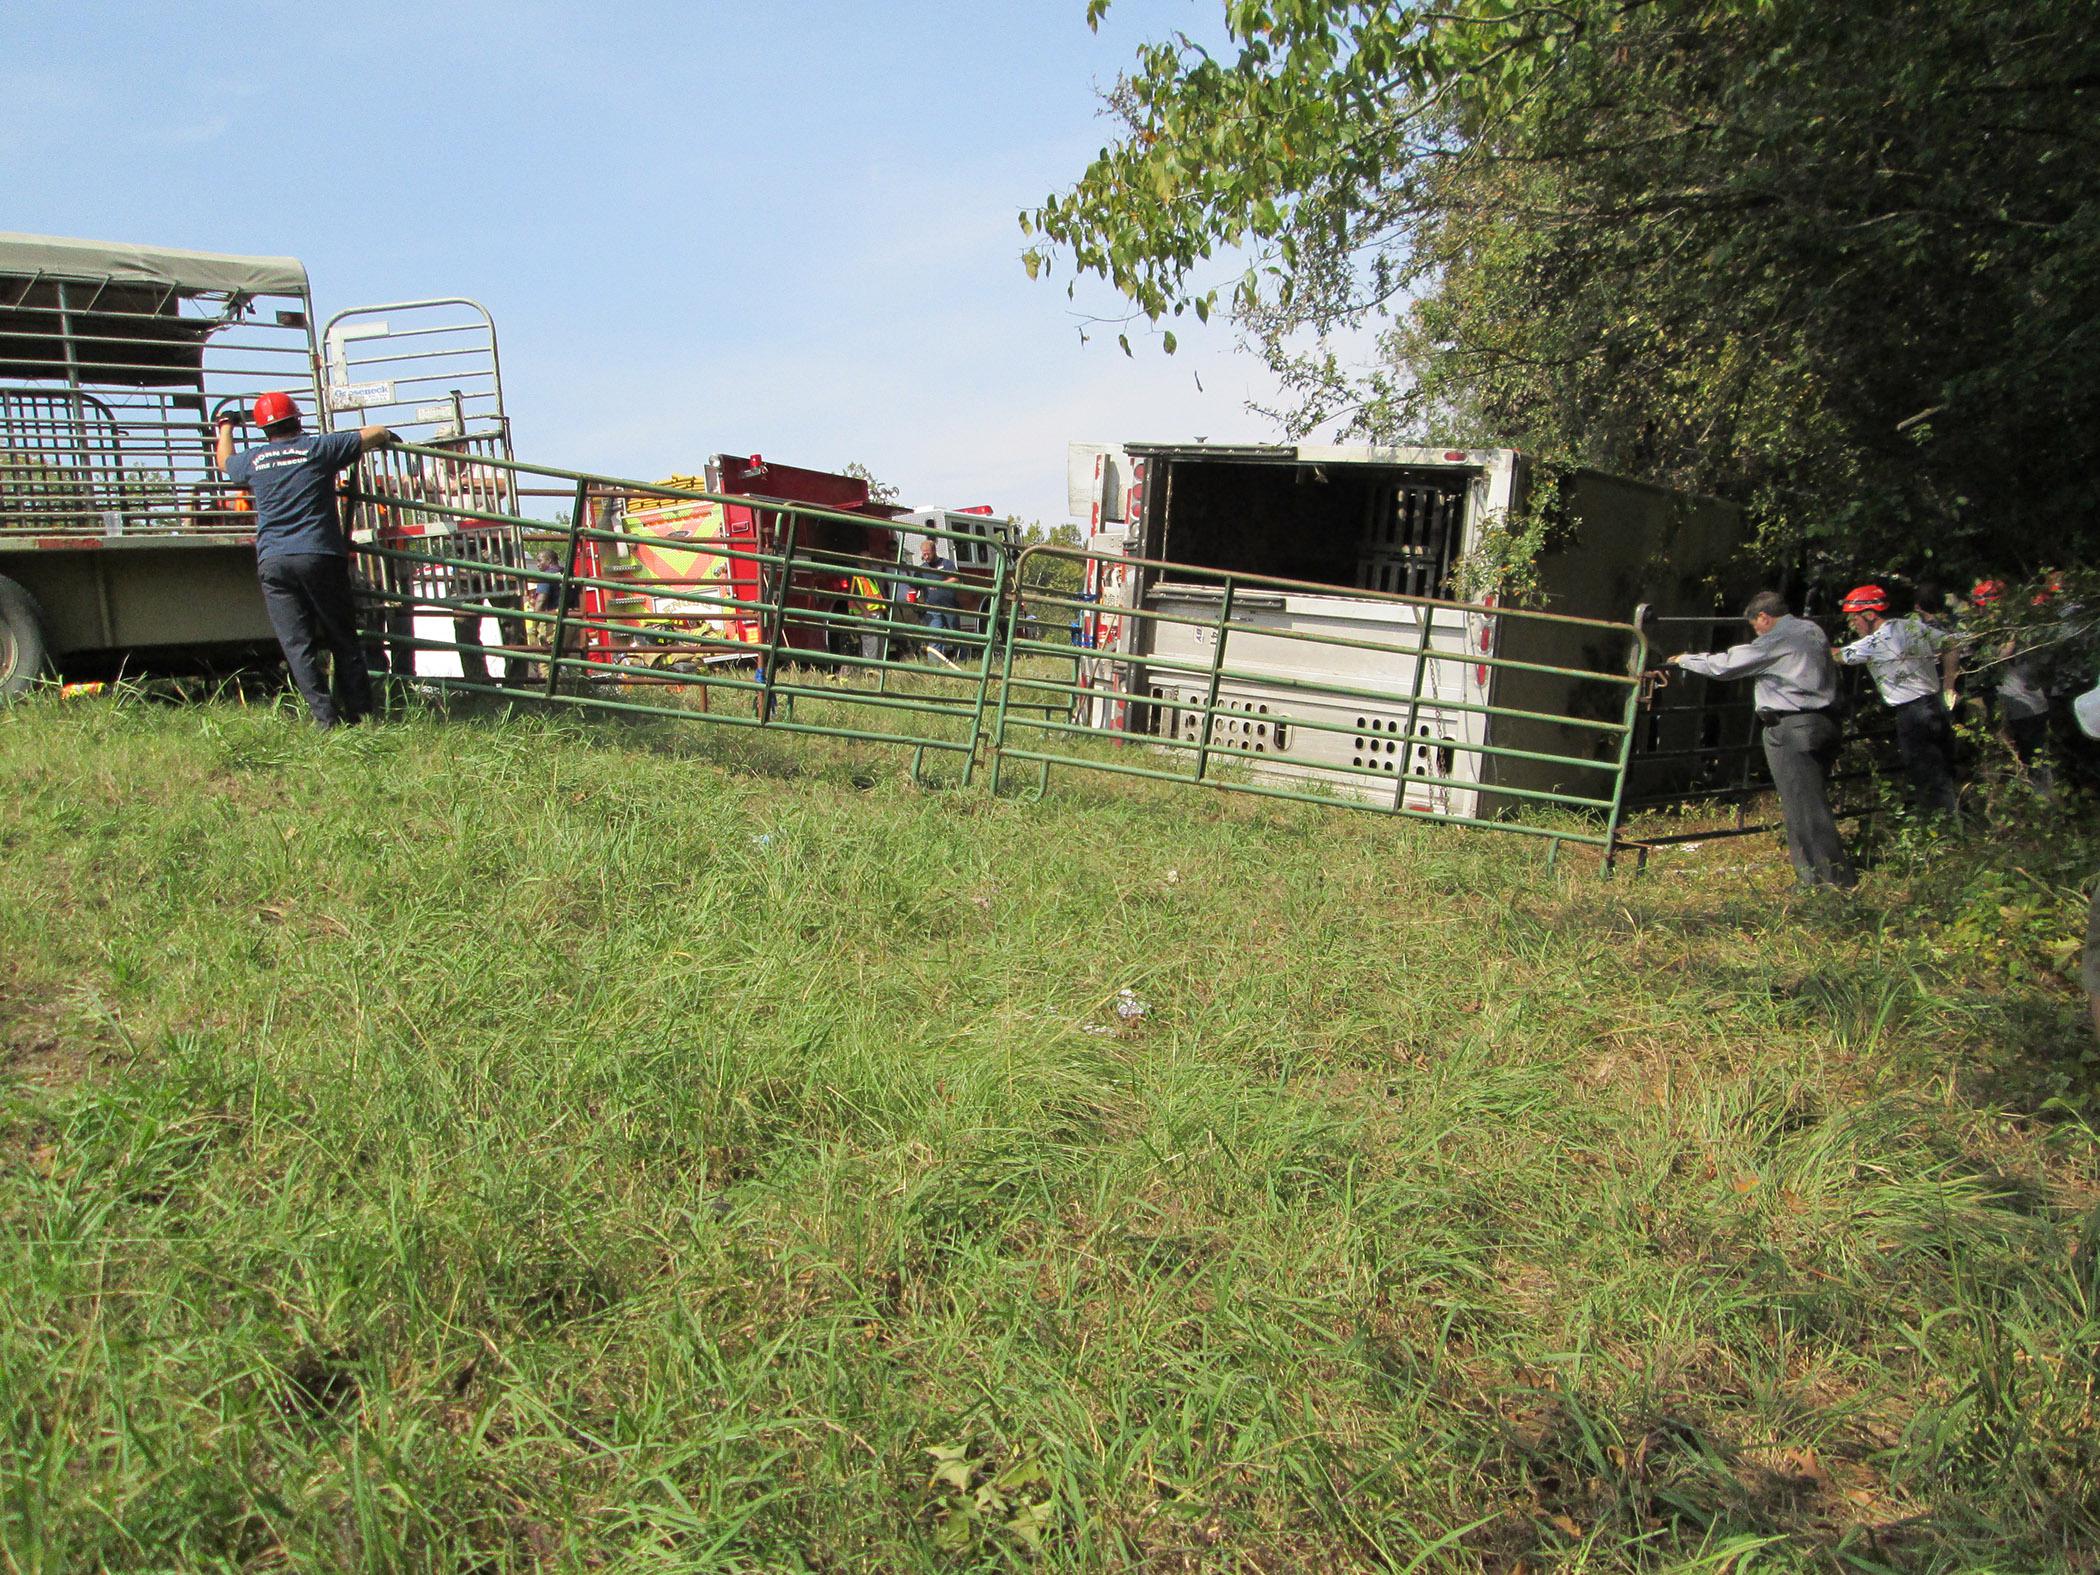 First responders brought in heavy equipment and portable fencing to help remove and contain about 100 cattle from an overturned 18-wheeler in DeSoto County on Highway 78 on Sept. 28, 2012. (Photo by Mississippi Board of Animal Health/Jesse Carter)